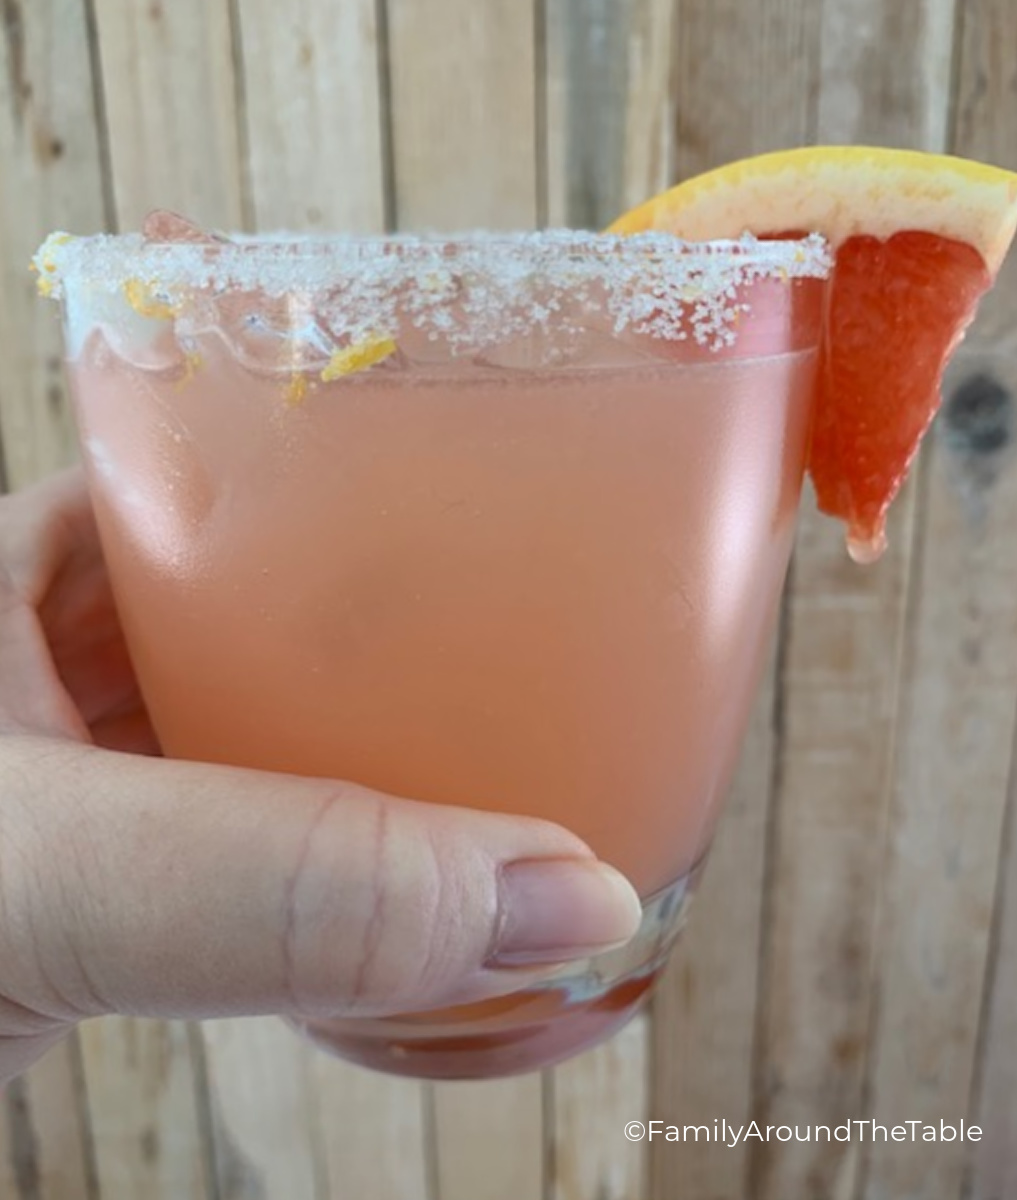 A cocktail garnished with a grapefruit wedge being held.